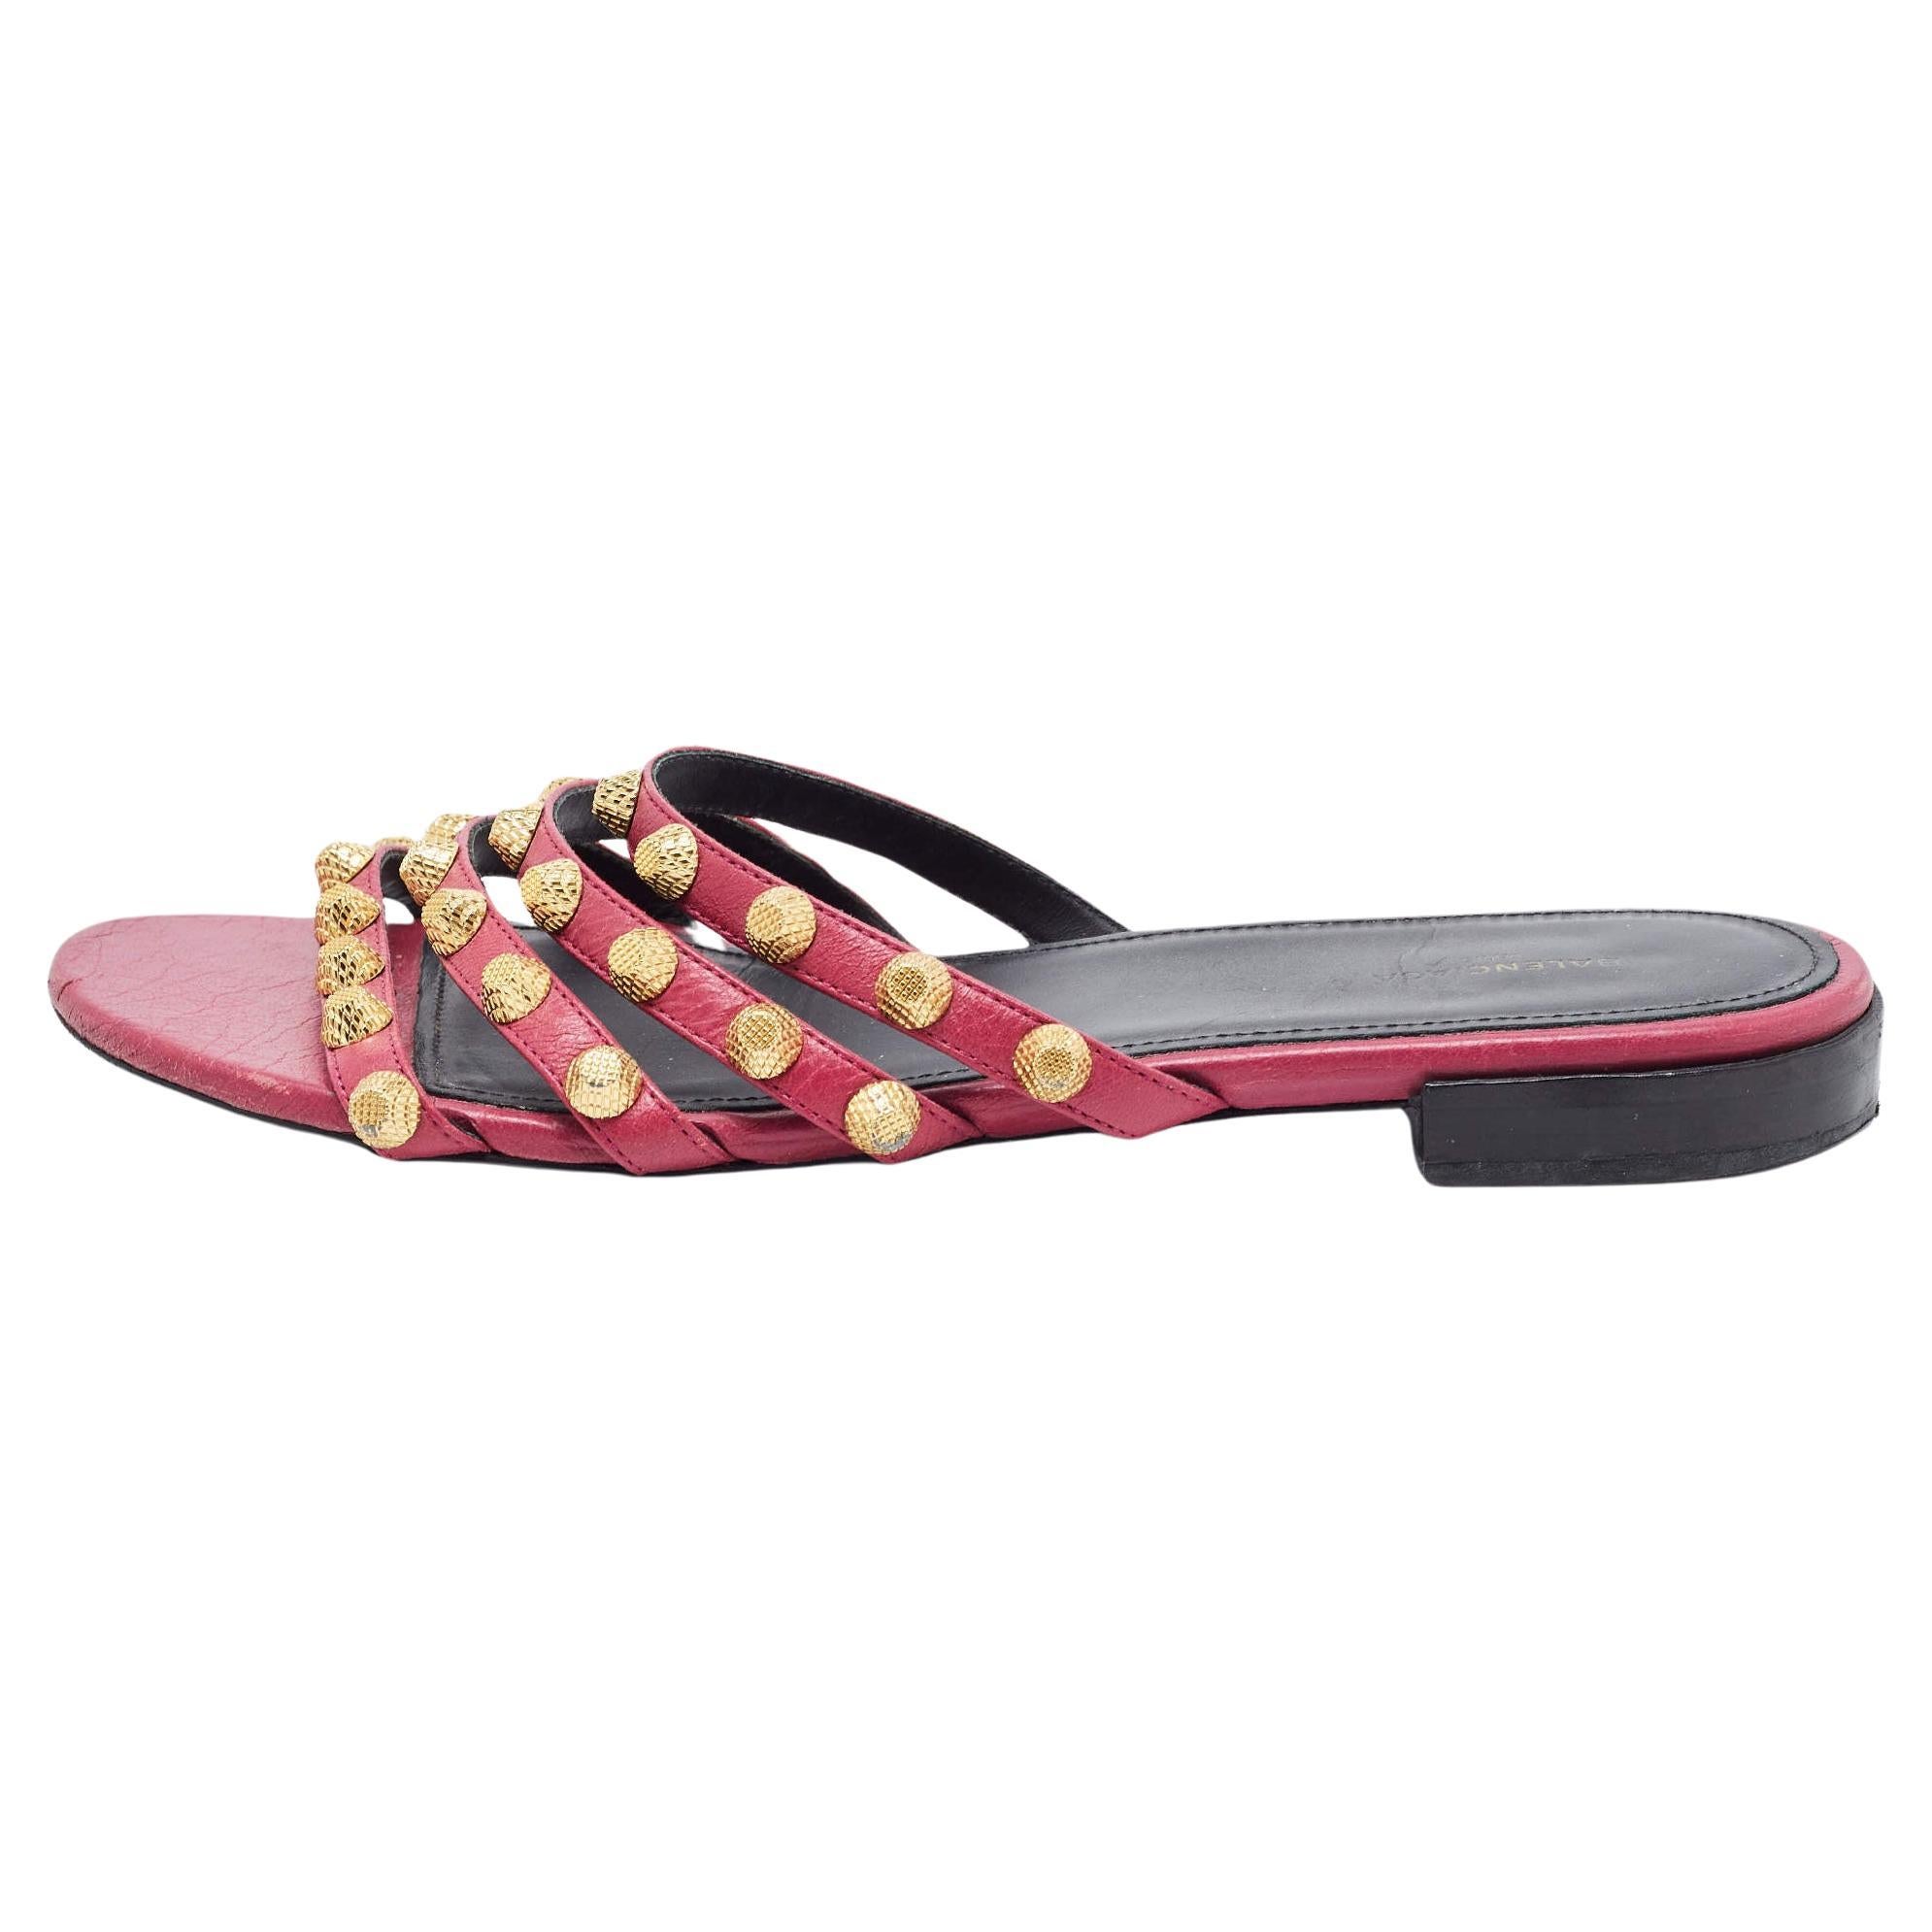 Balenciaga Pink Leather Arena Flat Slides Size 38.5 For Sale